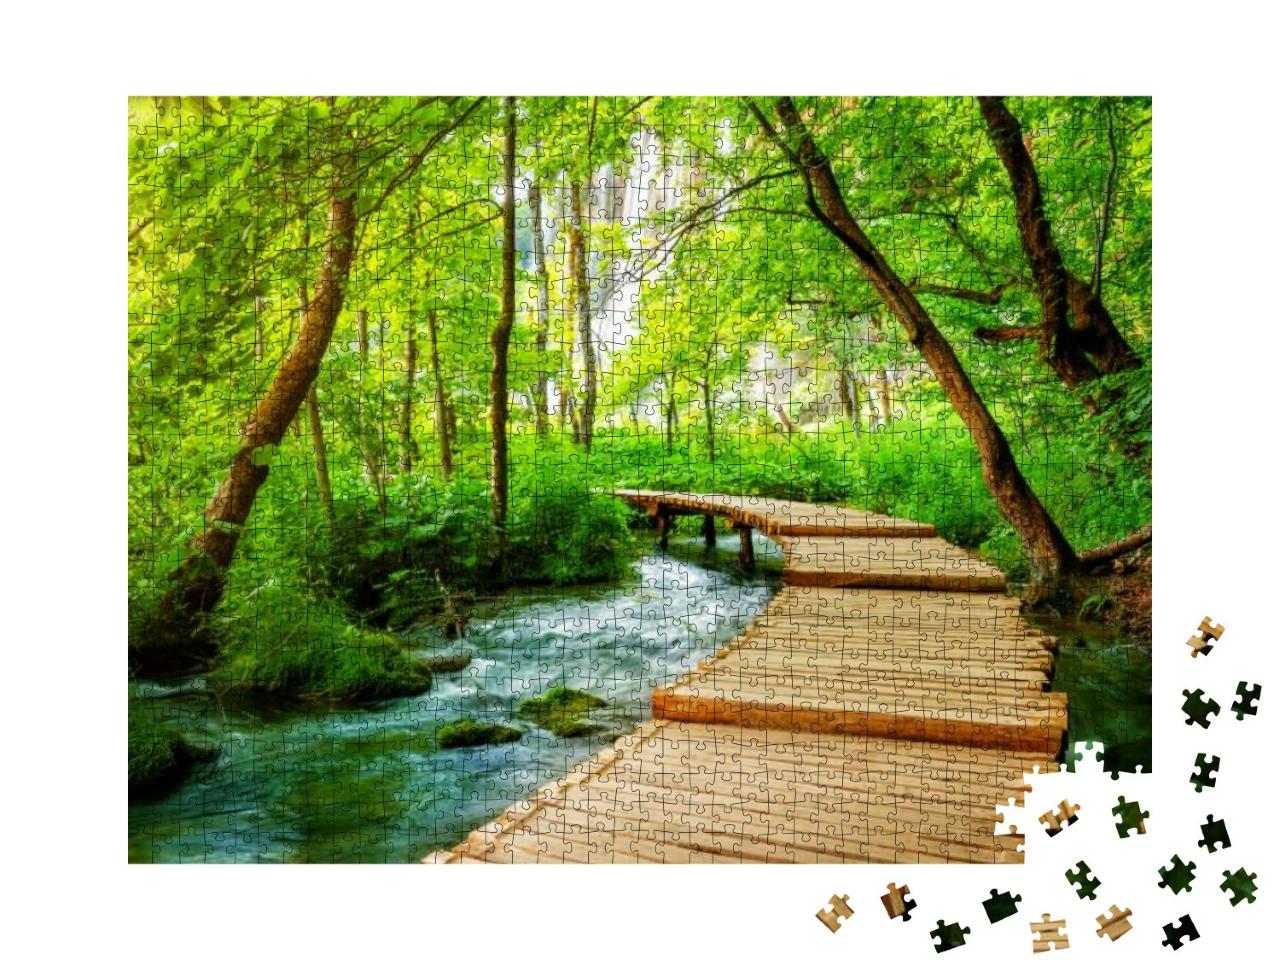 Beautiful Wooden Path Trail for Nature Trekking with Lake... Jigsaw Puzzle with 1000 pieces